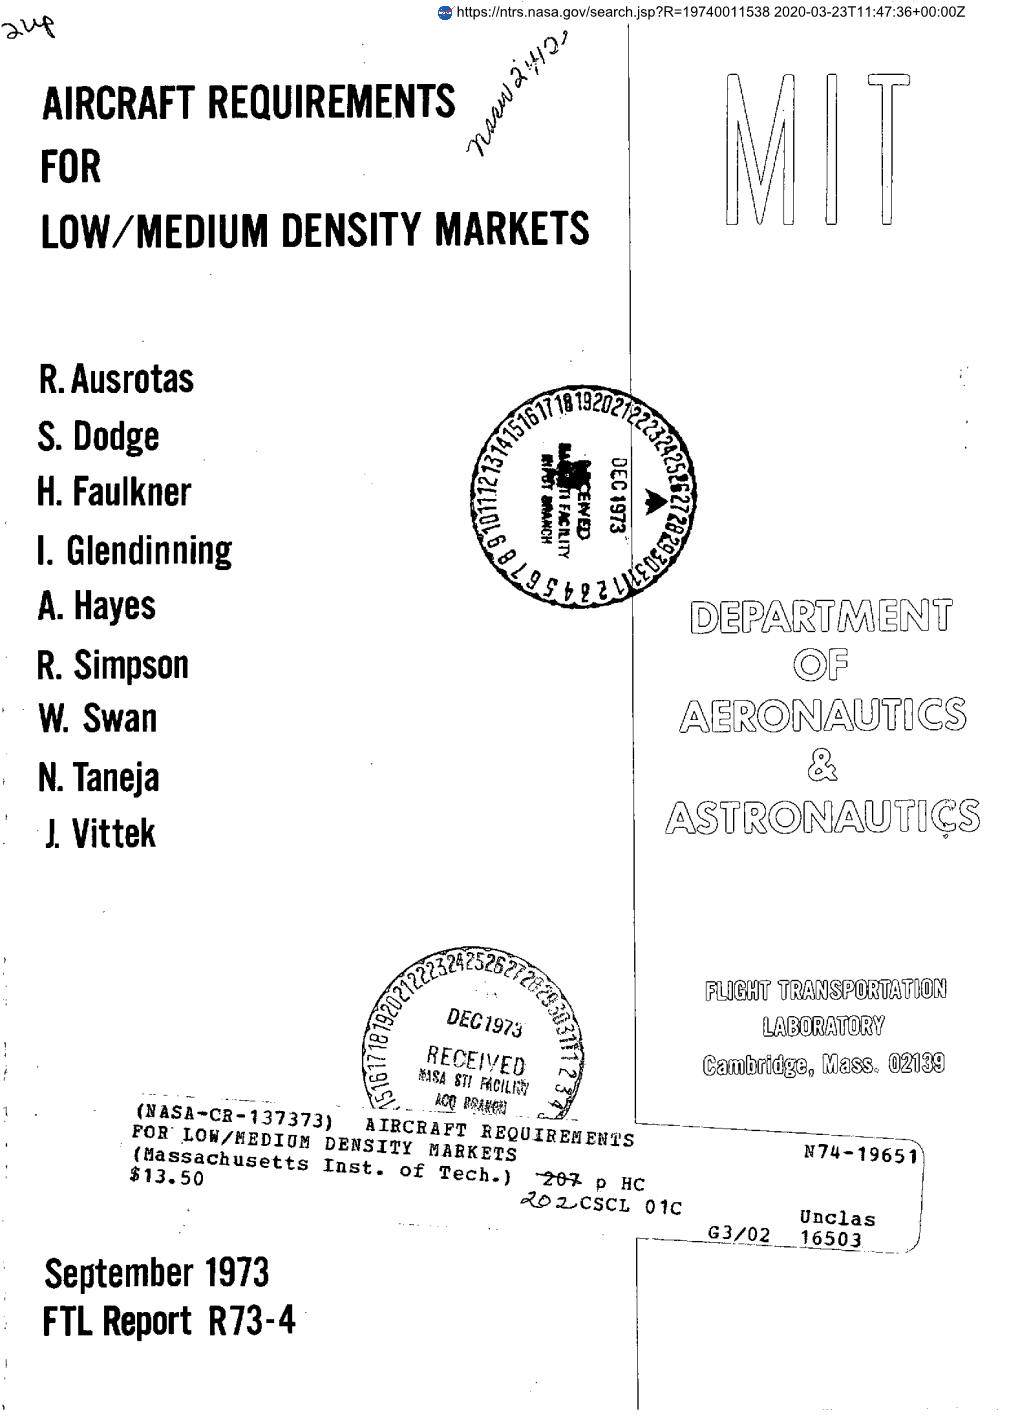 Aircraft Requirements F for Low/Medium Density Markets